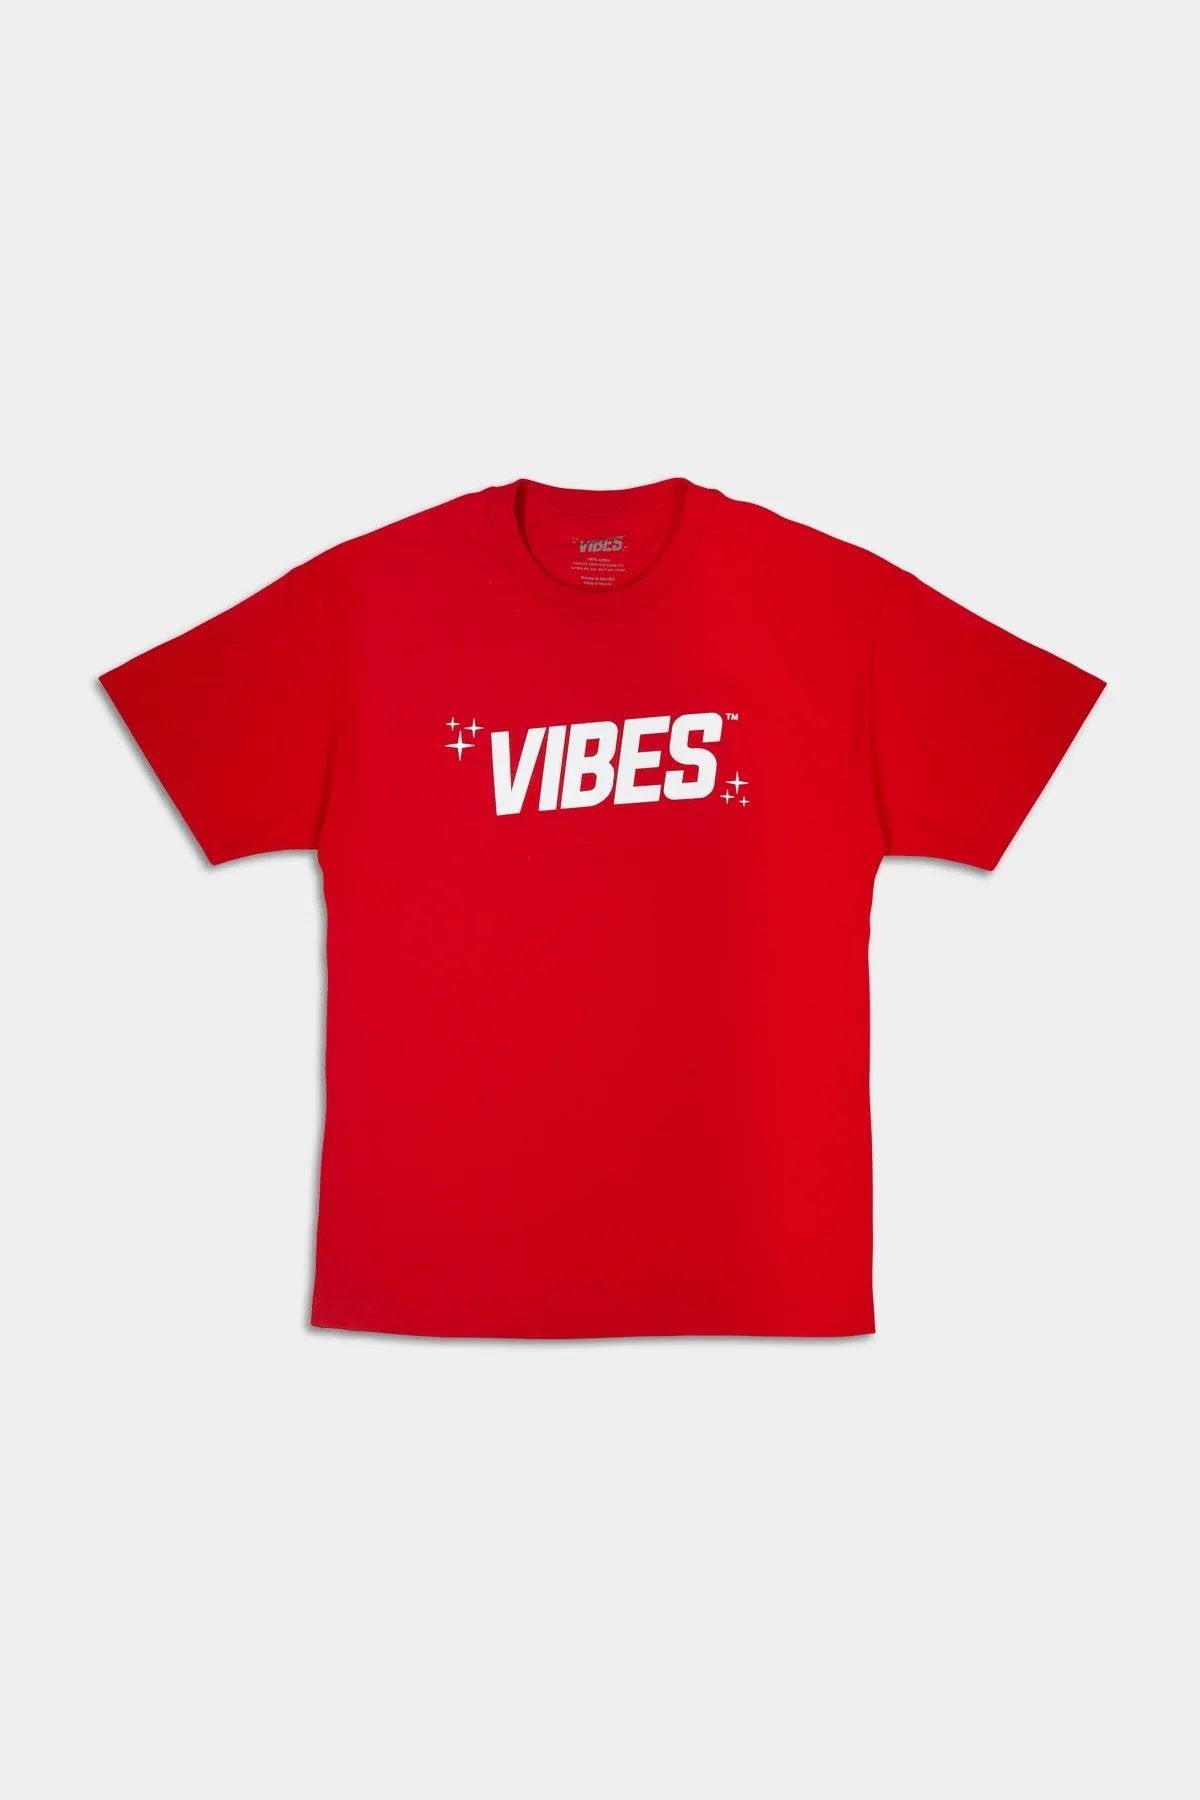 VIBES Red With White Logo T-Shirt 2X-Large